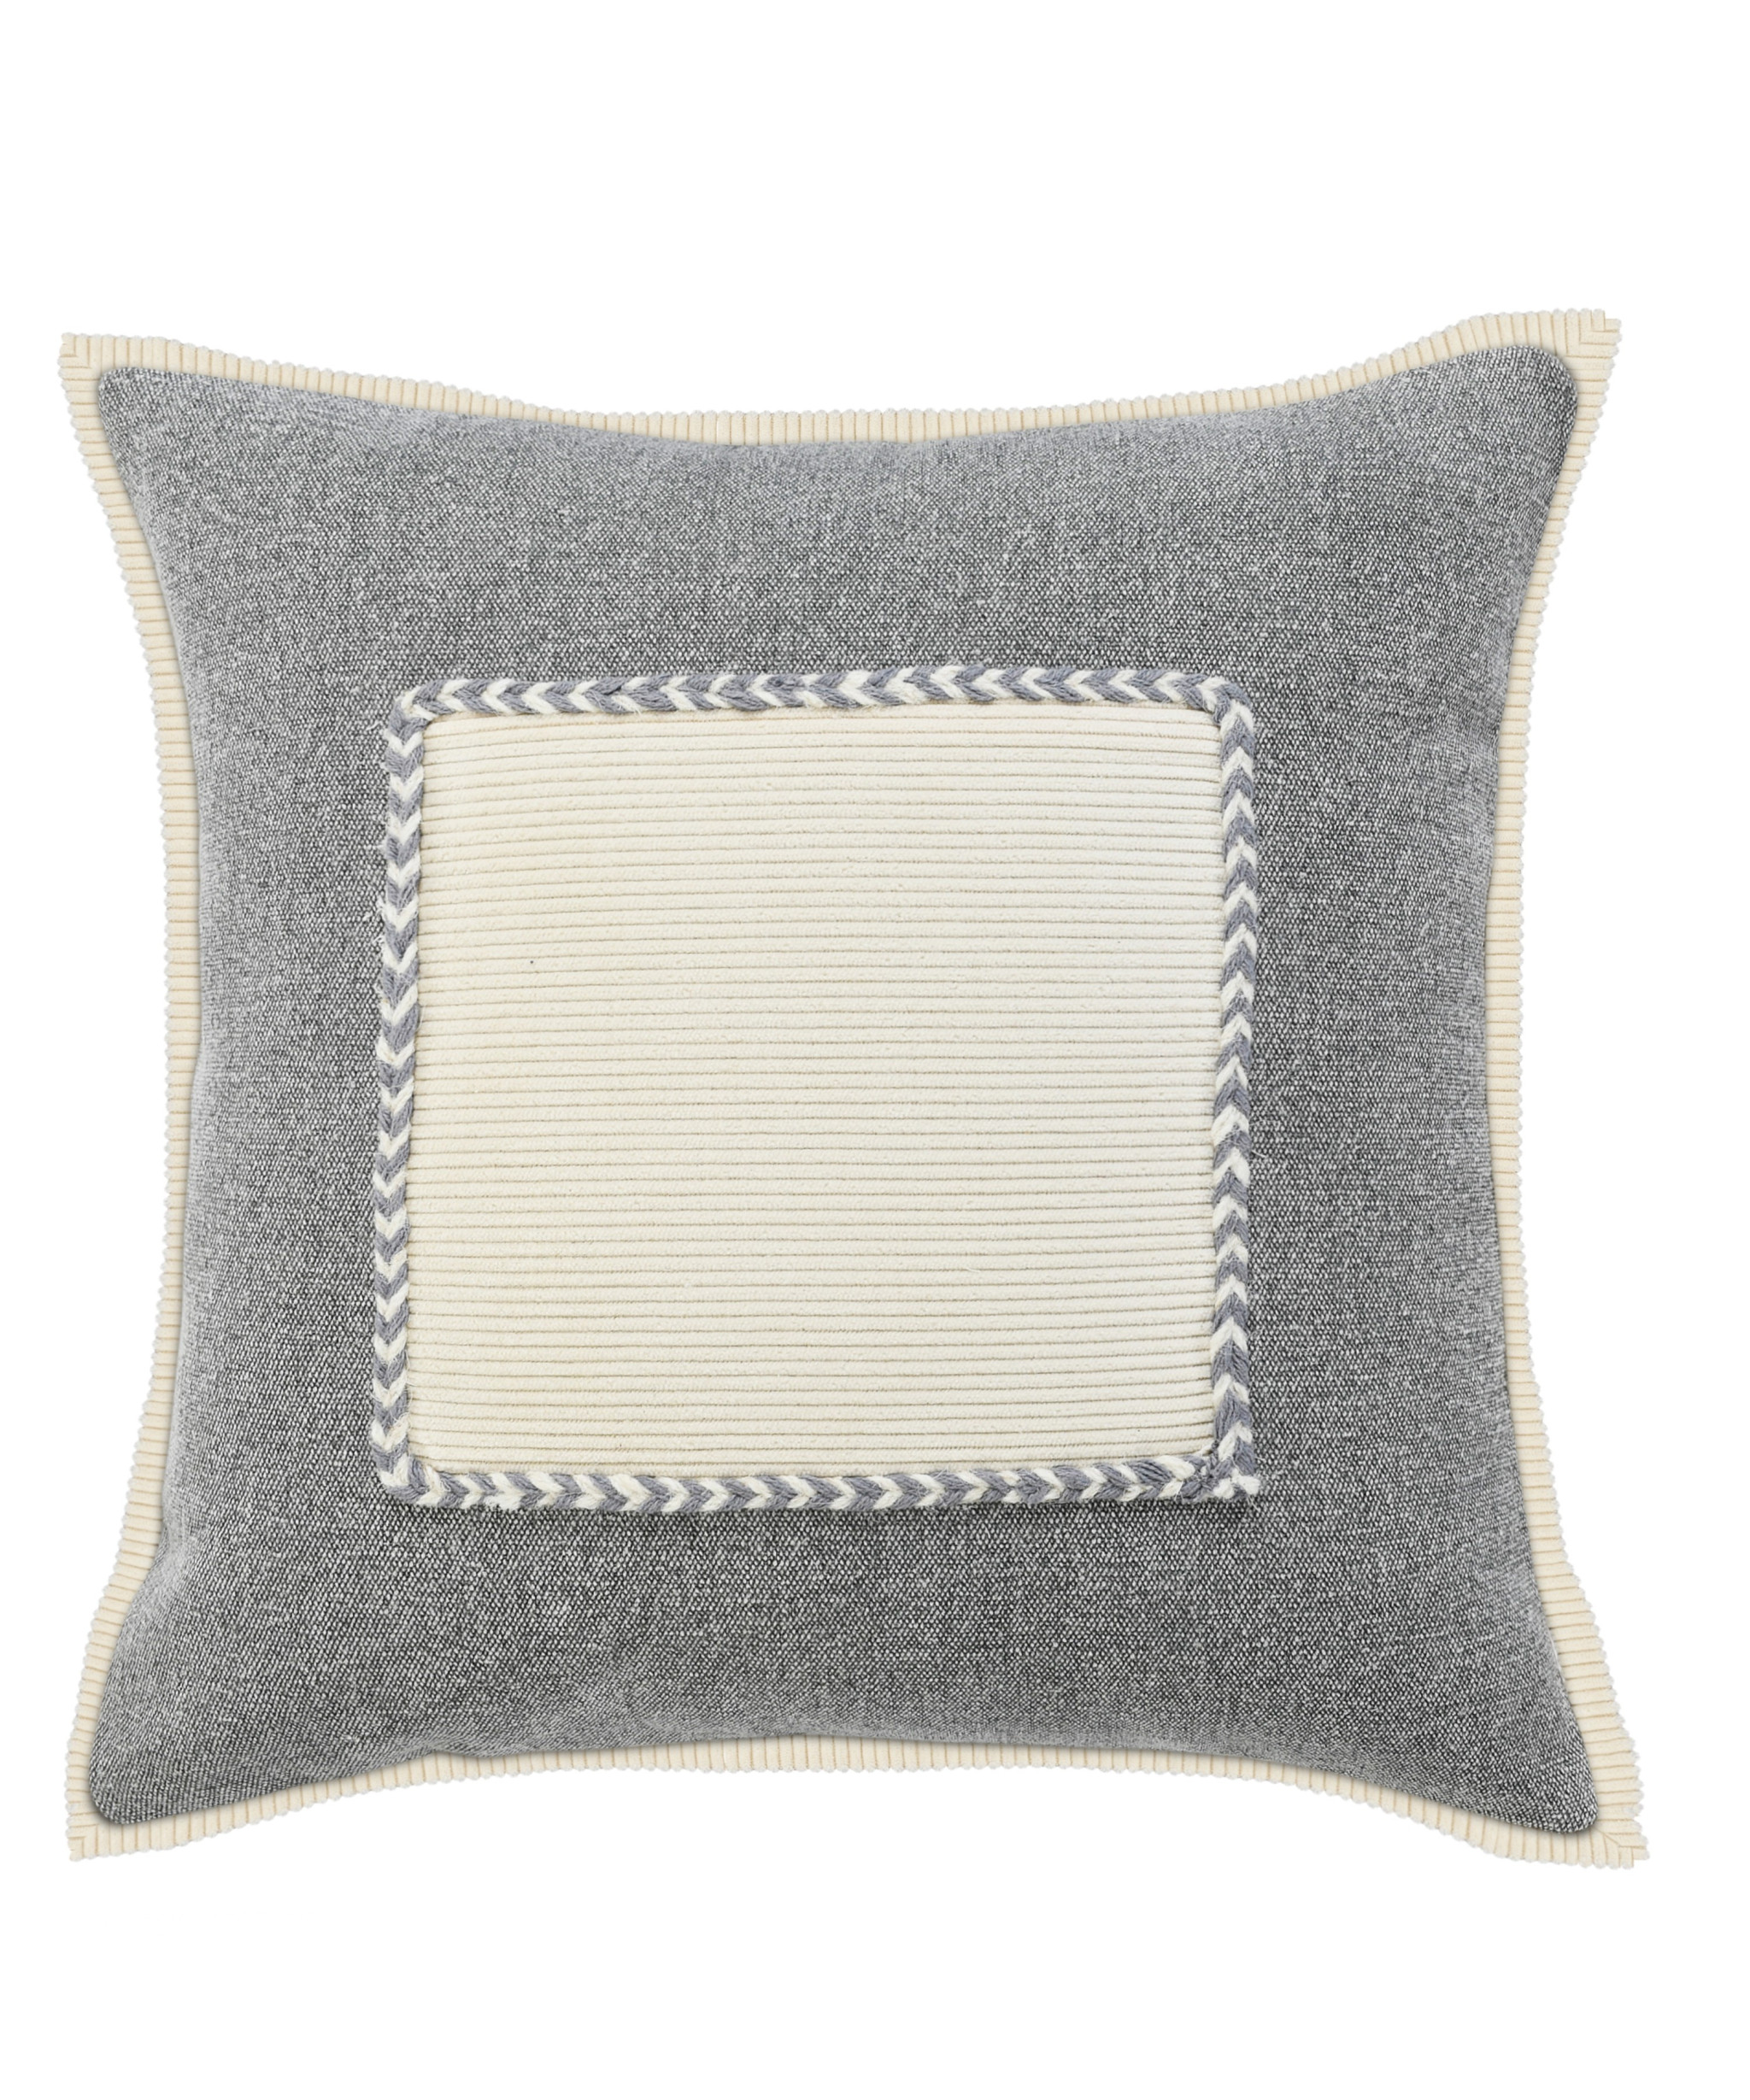 20" X 20" Gray And Cream 100% Cotton Zippered Pillow-517122-1